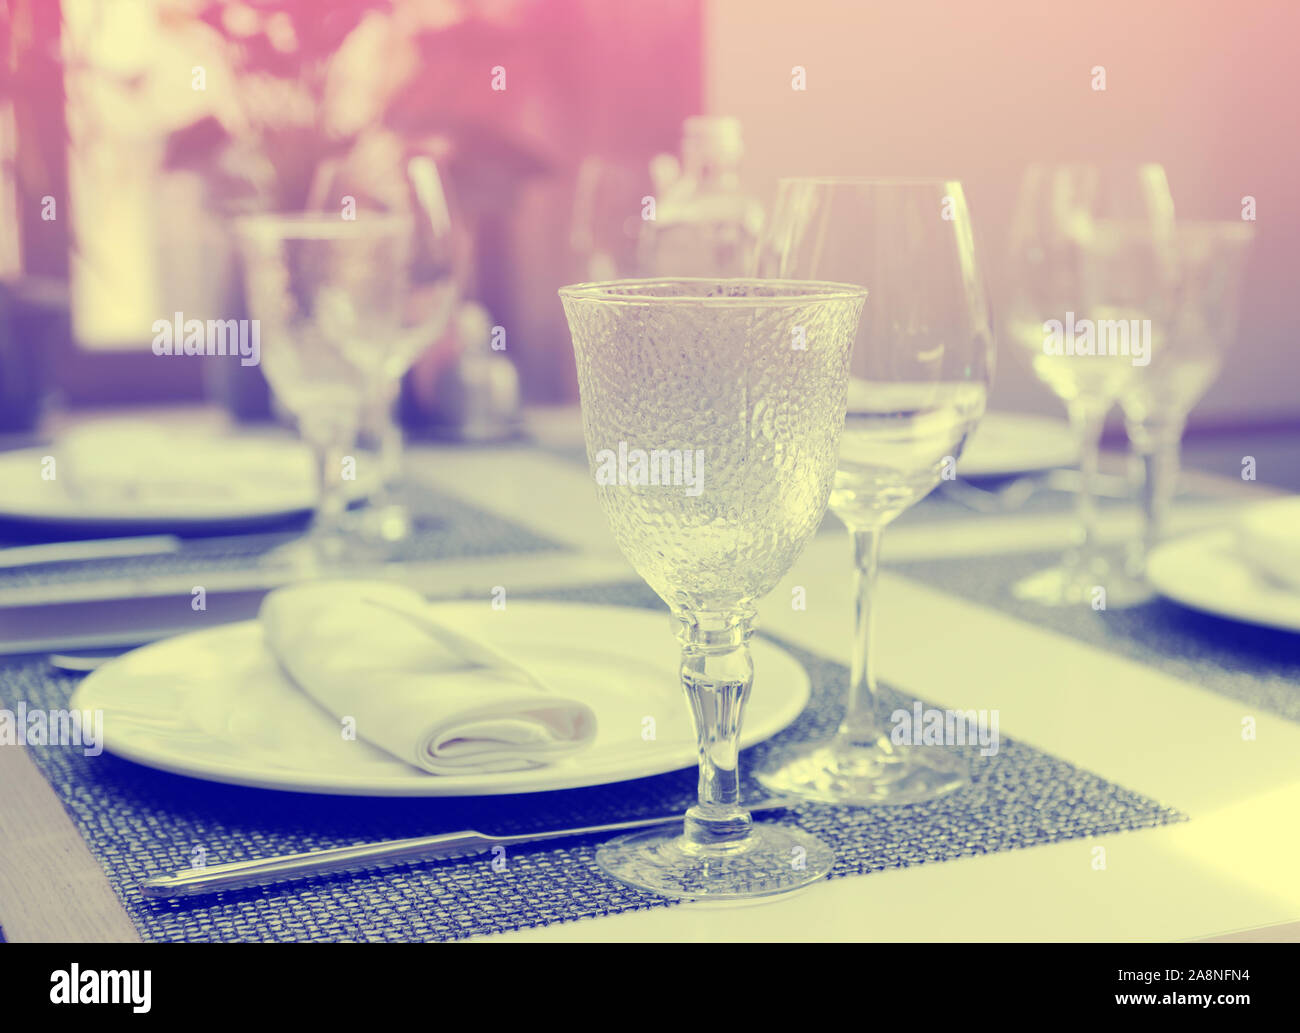 Nice place setting in an expensive restaurant, toned image Stock Photo